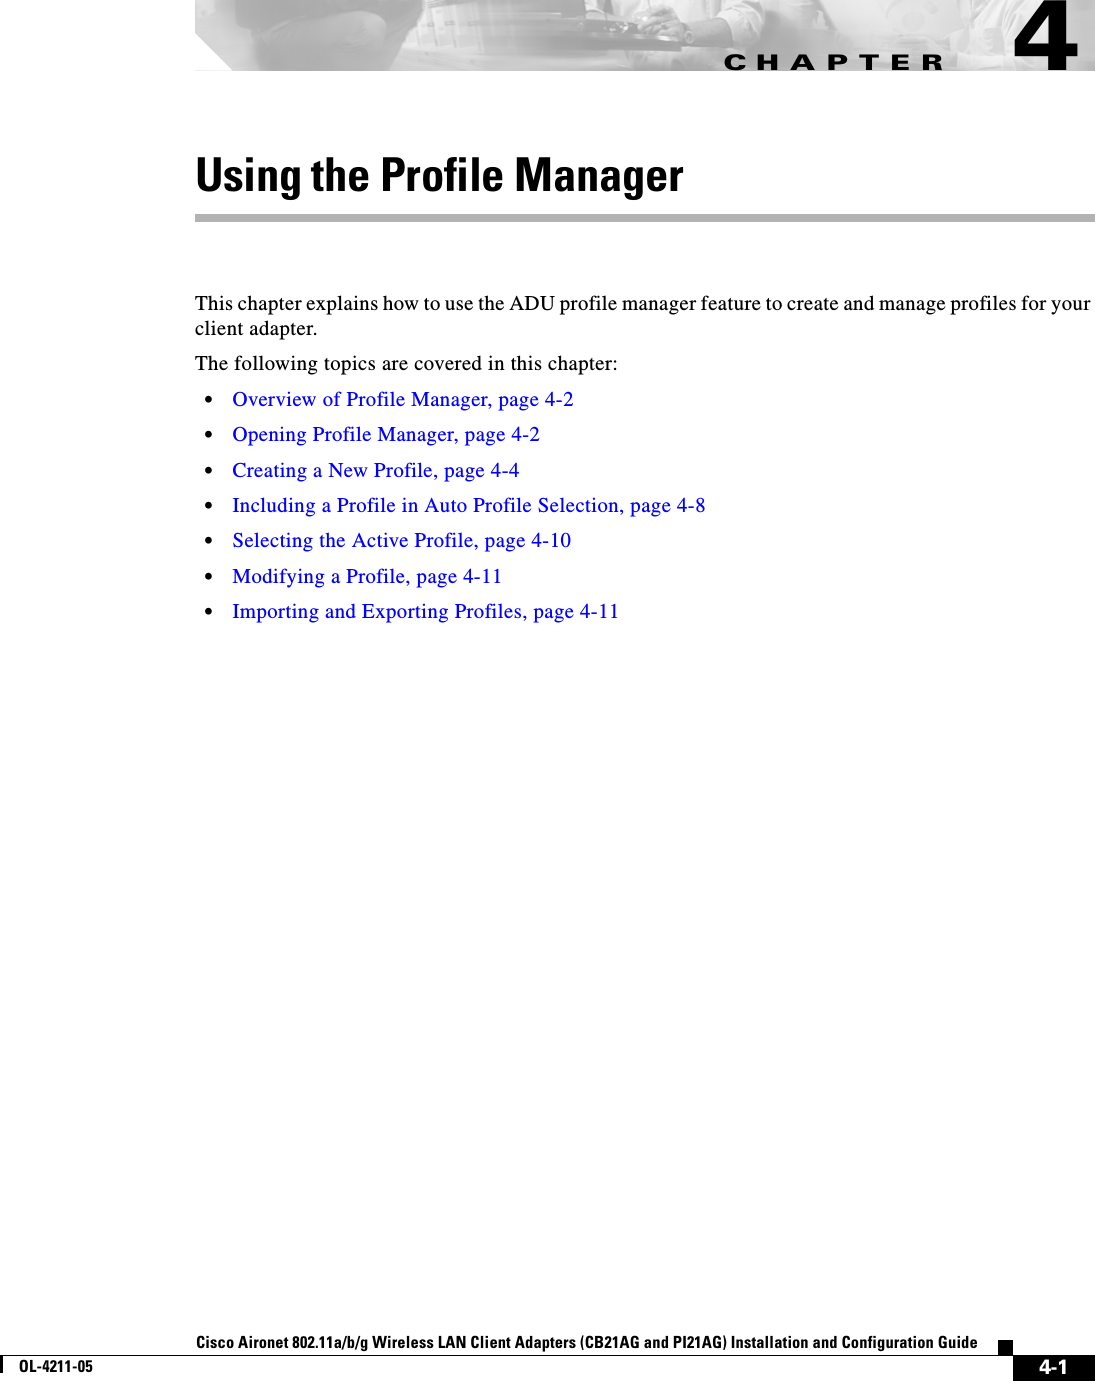 CHAPTER4-1Cisco Aironet 802.11a/b/g Wireless LAN Client Adapters (CB21AG and PI21AG) Installation and Configuration GuideOL-4211-054Using the Profile ManagerThis chapter explains how to use the ADU profile manager feature to create and manage profiles for your client adapter.The following topics are covered in this chapter:•Overview of Profile Manager, page 4-2•Opening Profile Manager, page 4-2•Creating a New Profile, page 4-4•Including a Profile in Auto Profile Selection, page 4-8•Selecting the Active Profile, page 4-10•Modifying a Profile, page 4-11•Importing and Exporting Profiles, page 4-11